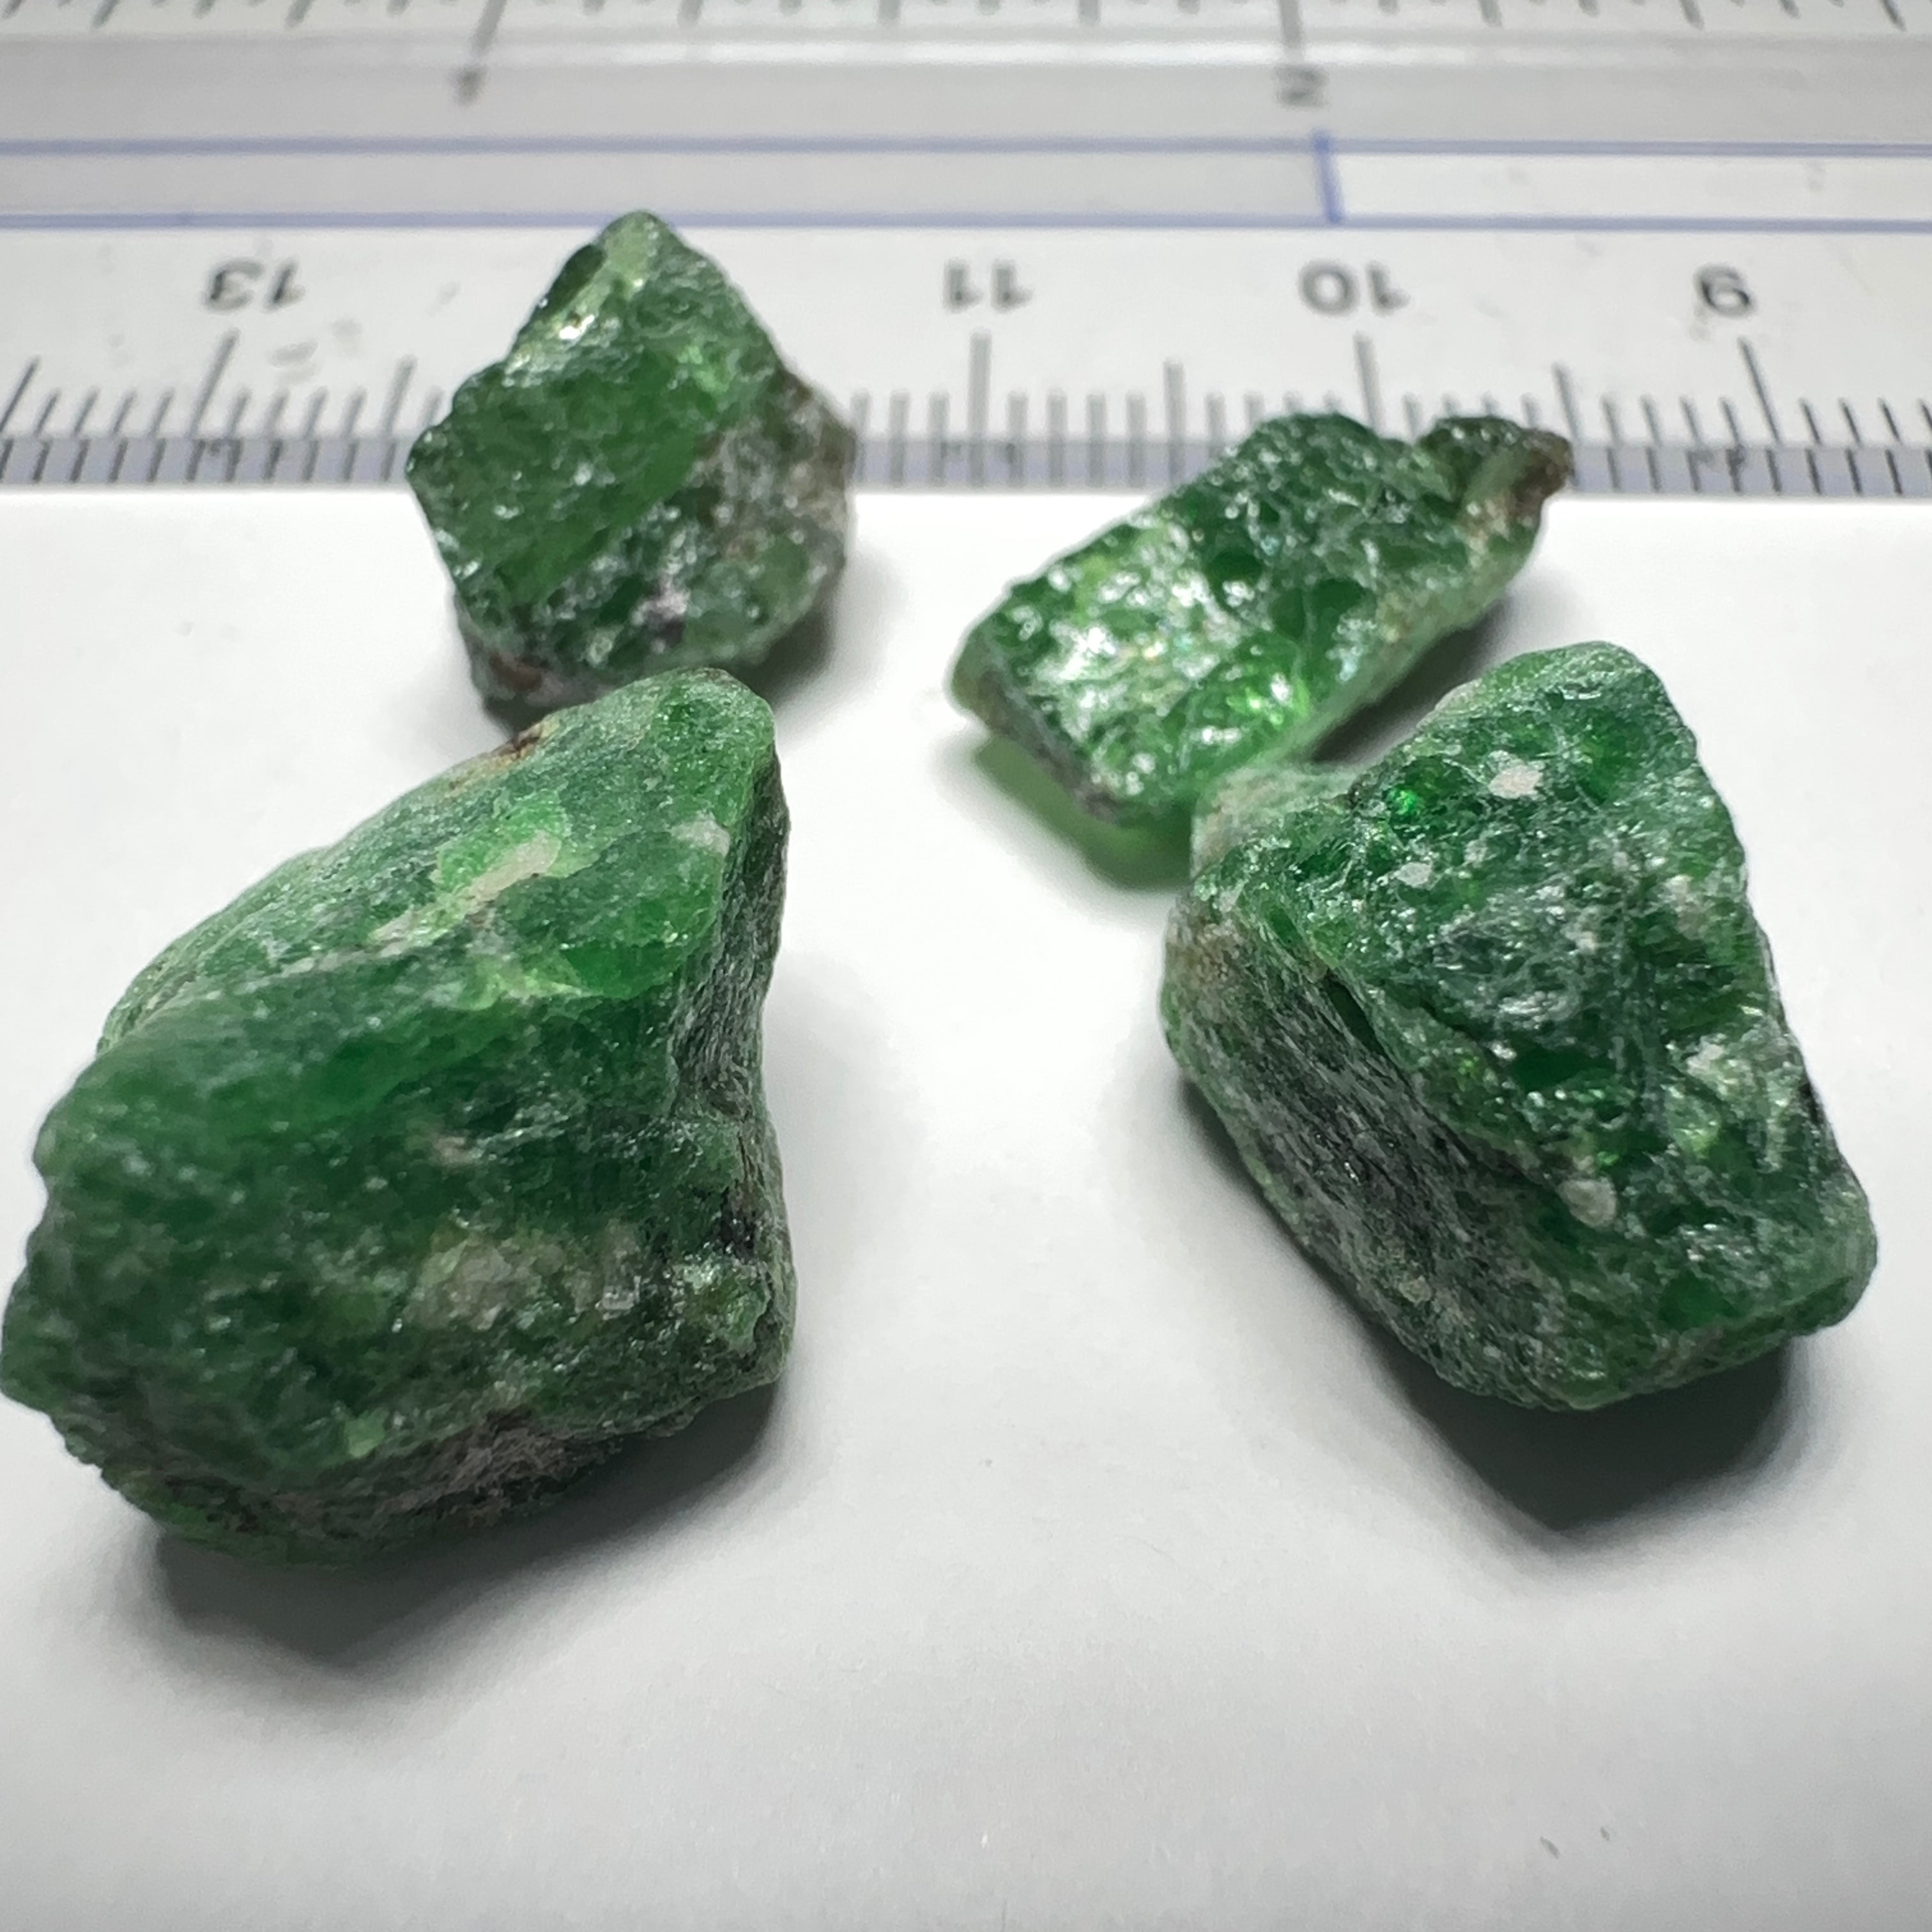 37.03ct Tsavorite Garnet Lot, Tanzania. Untreated Unheated. 4.82ct- 13.83ct. Good as specimens to add to a collection